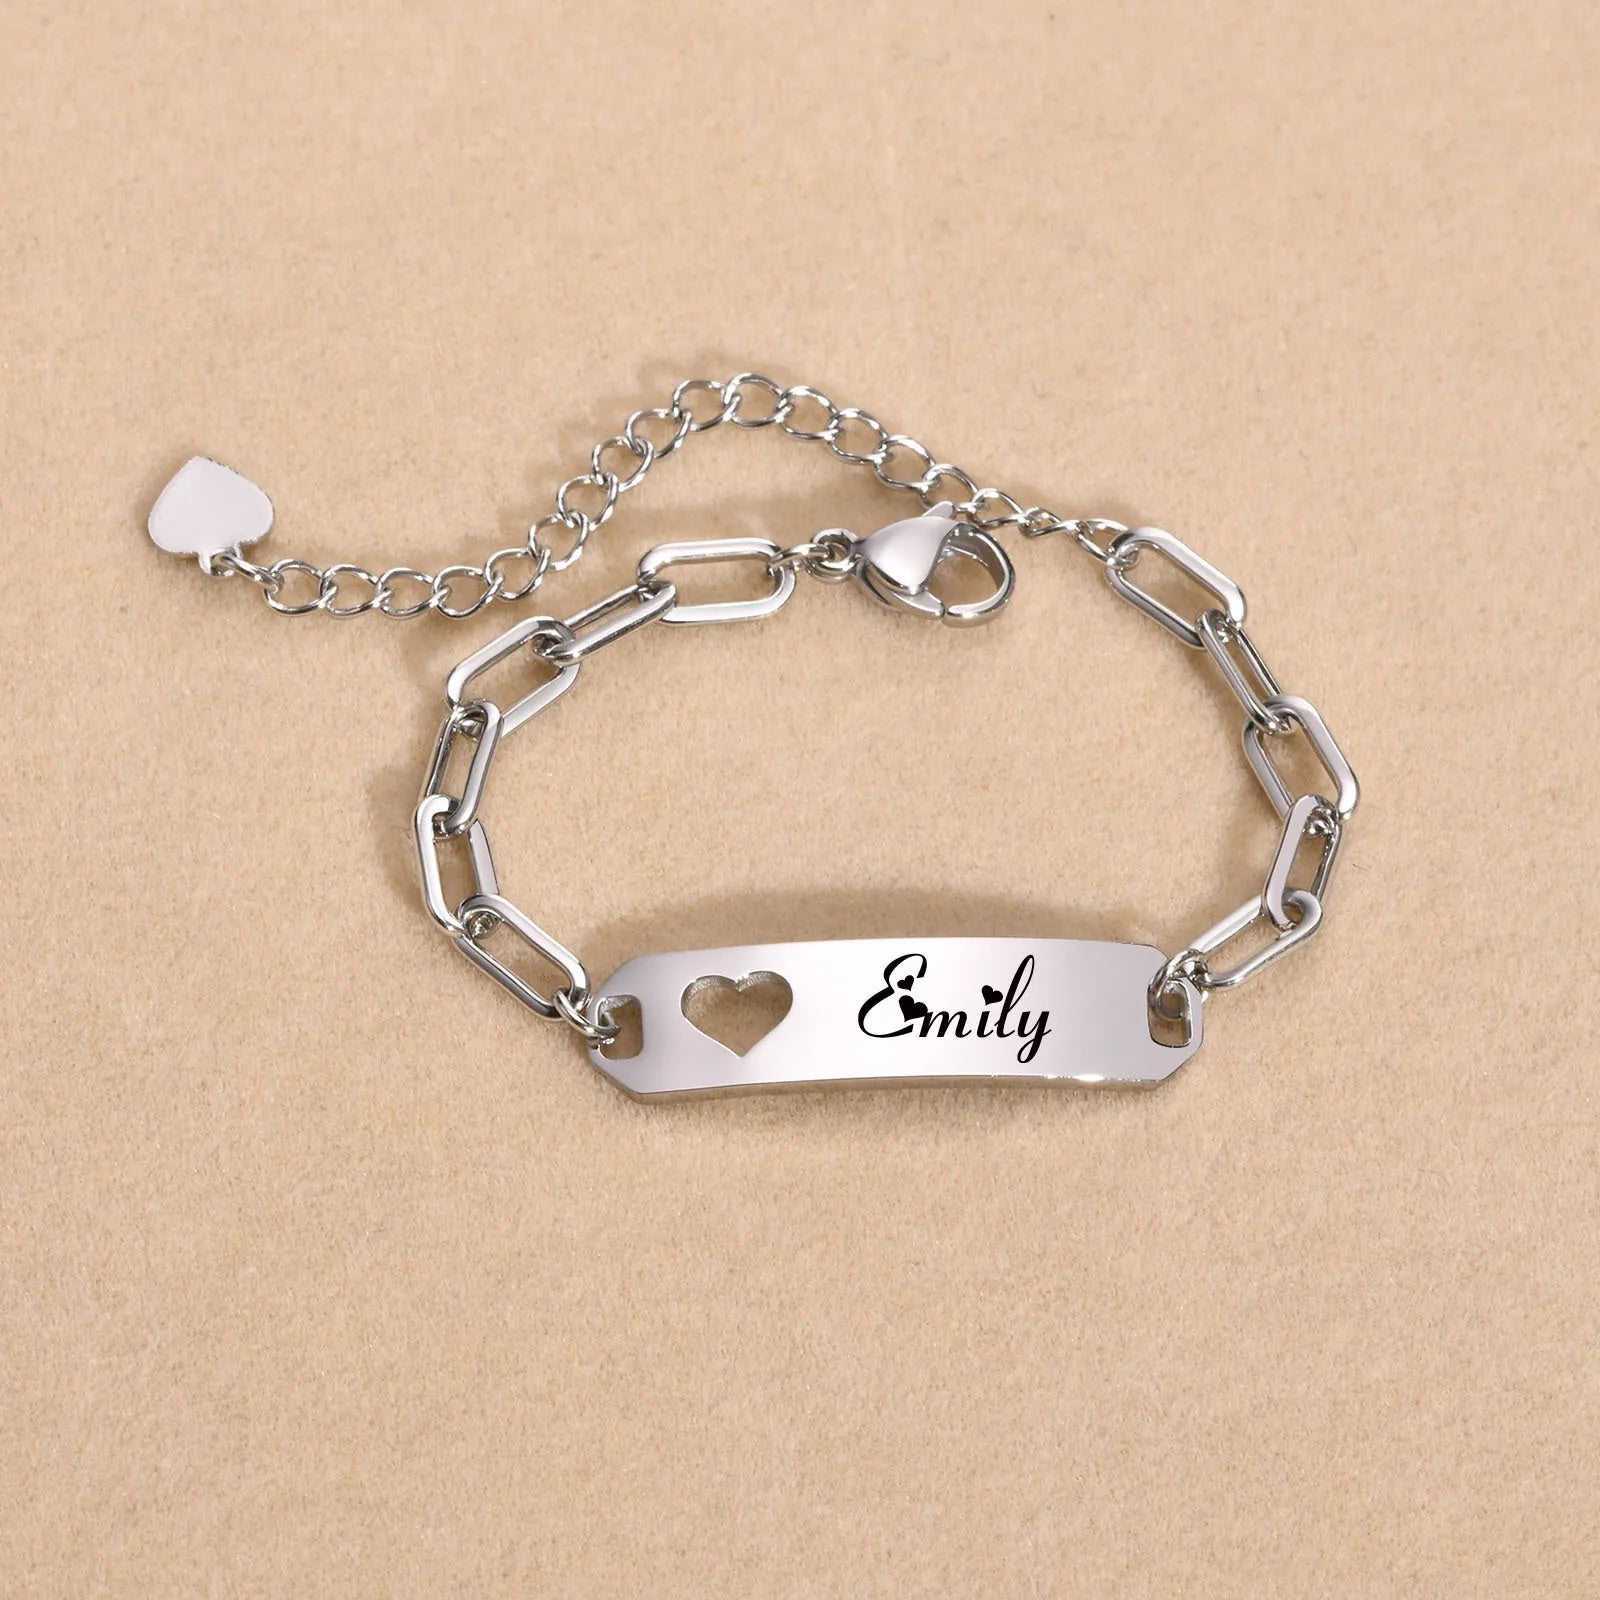 Cherish Every Moment: Personalized Baby Name ID Bracelet with Heart!